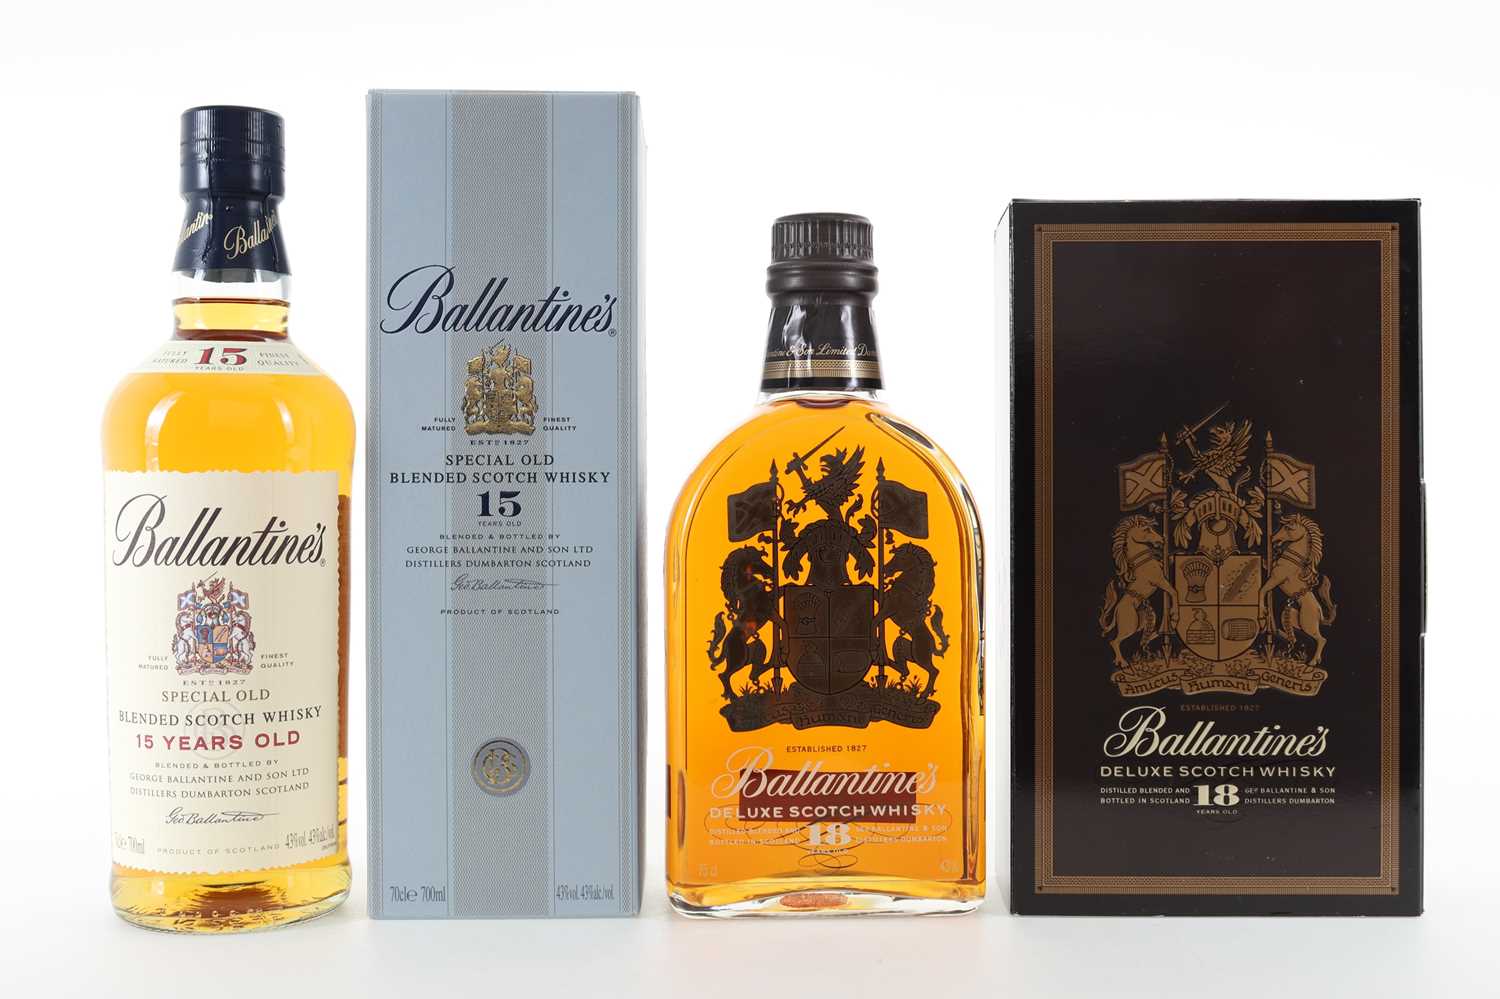 BALLANTINE'S 18 YEAR OLD 75CL AND 15 YEAR OLD BLENDED WHISKY